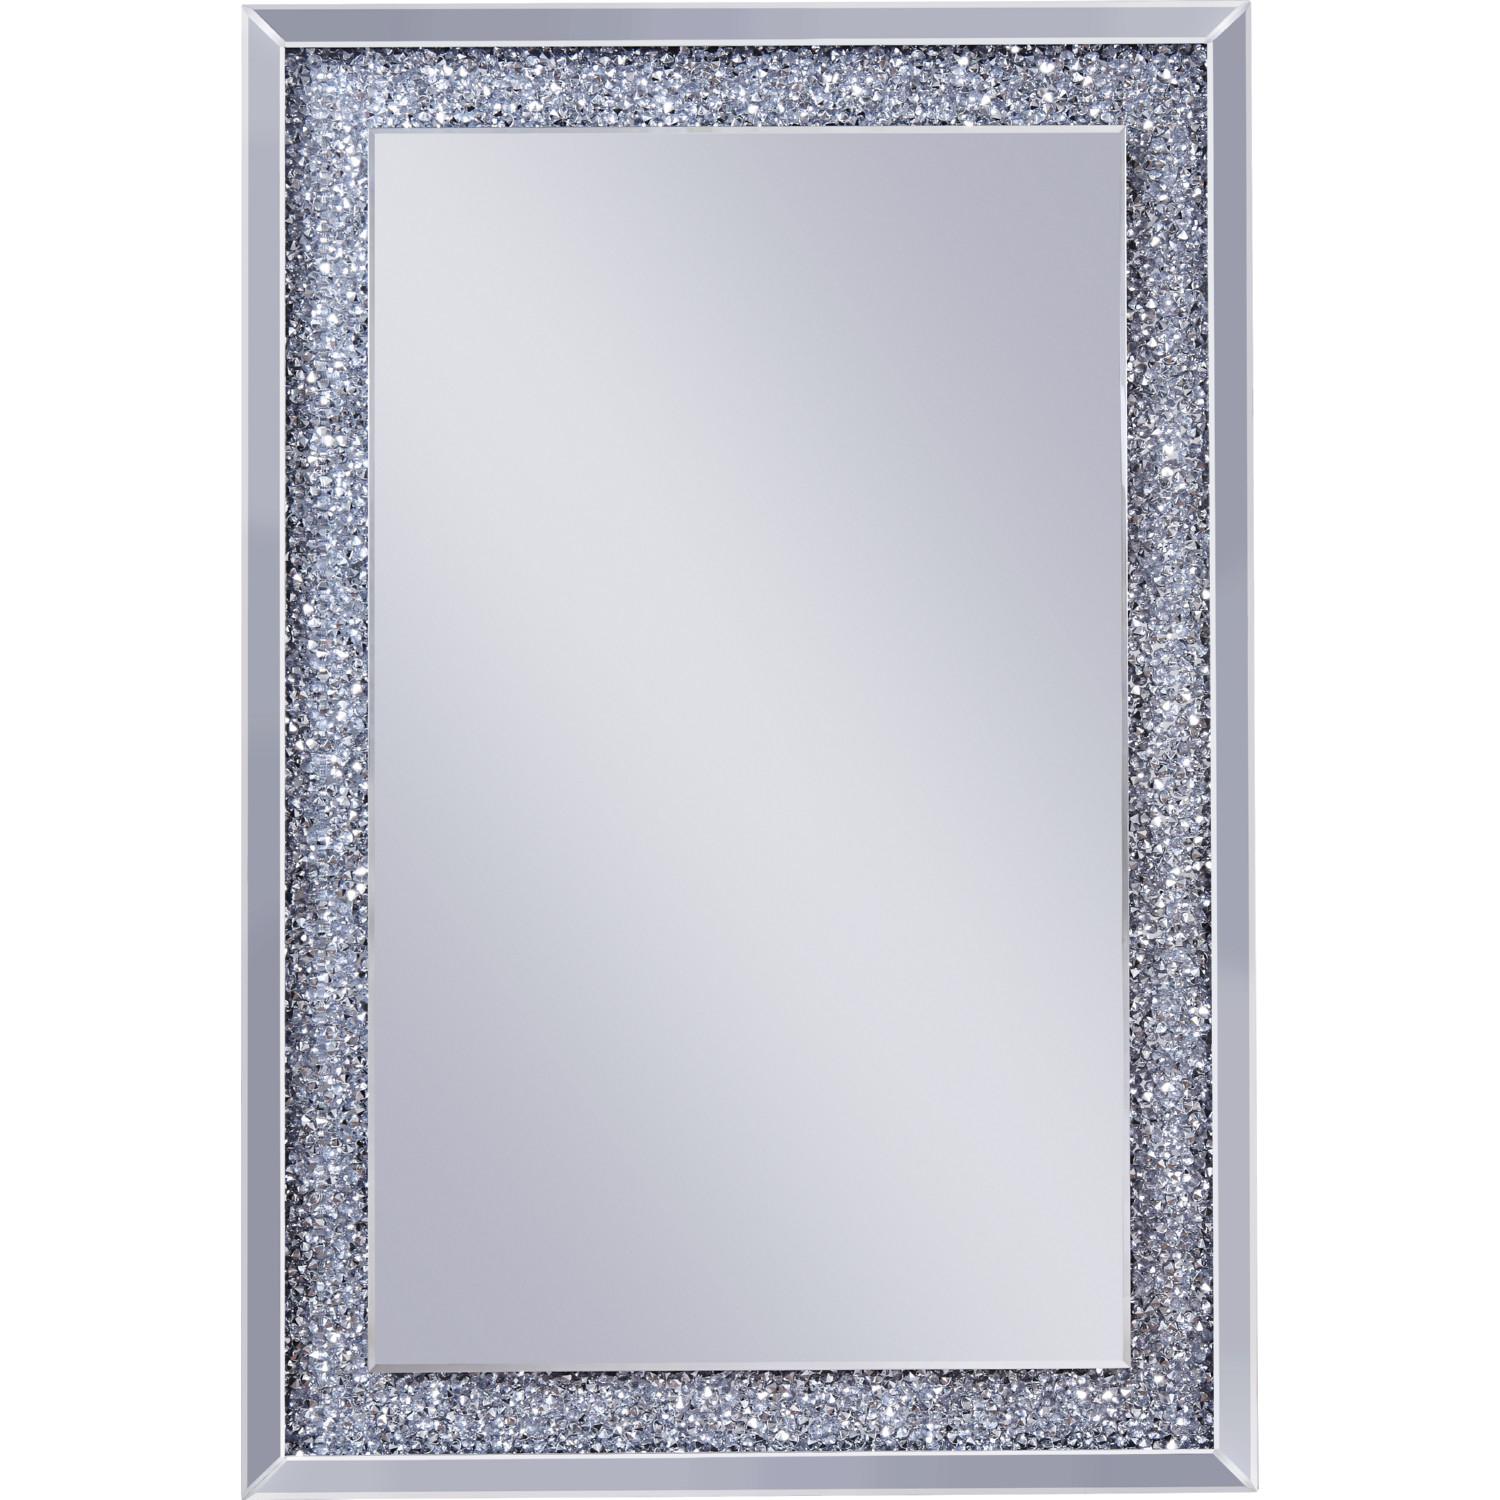 Noralie Wall Decor Mirror 97573 Acme,Instore